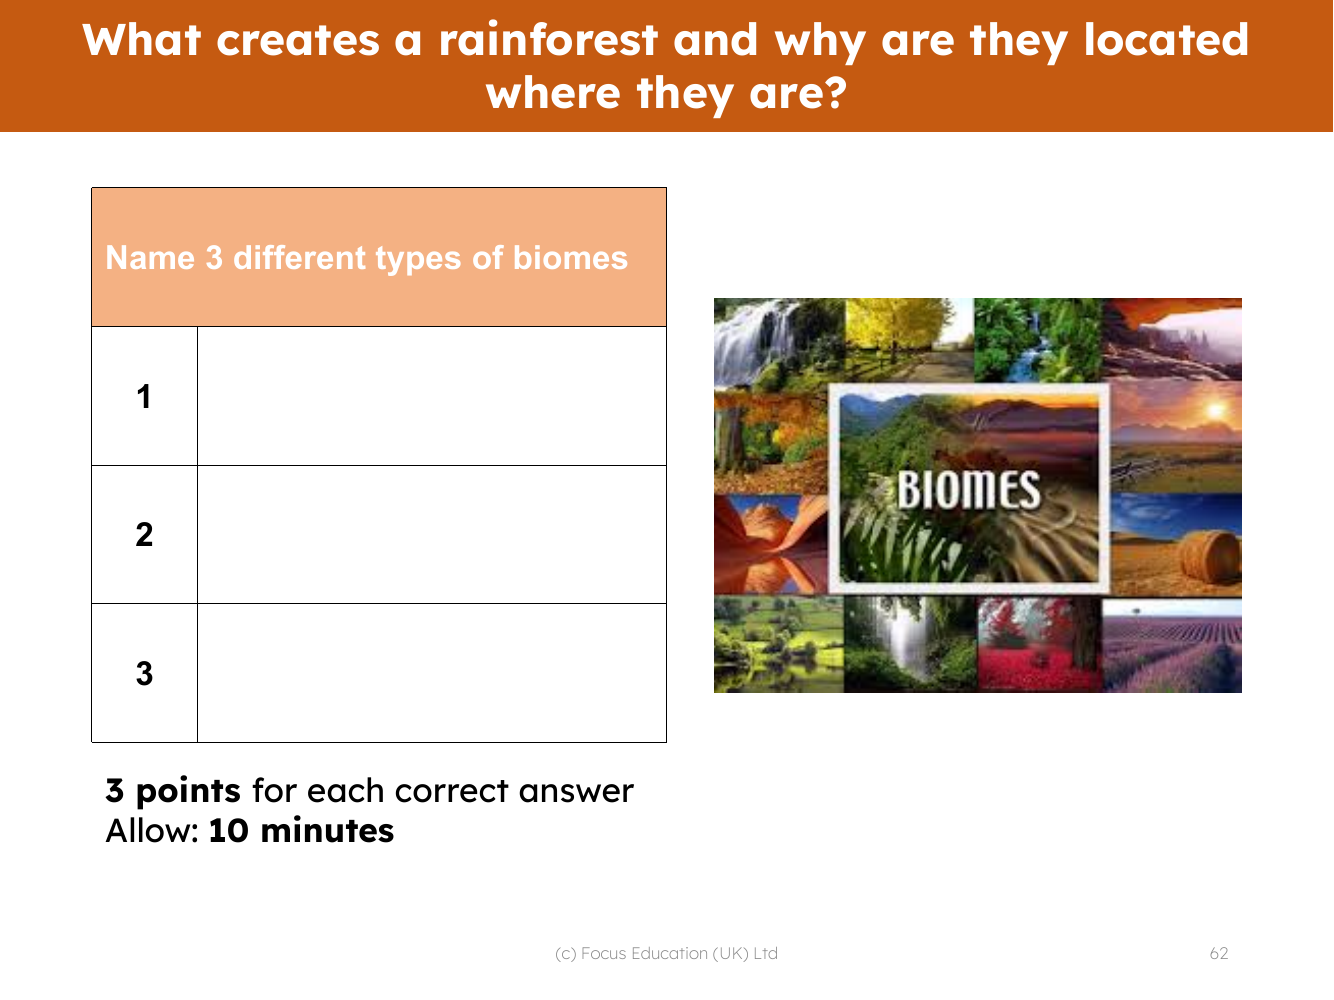 Name three different types of biomes